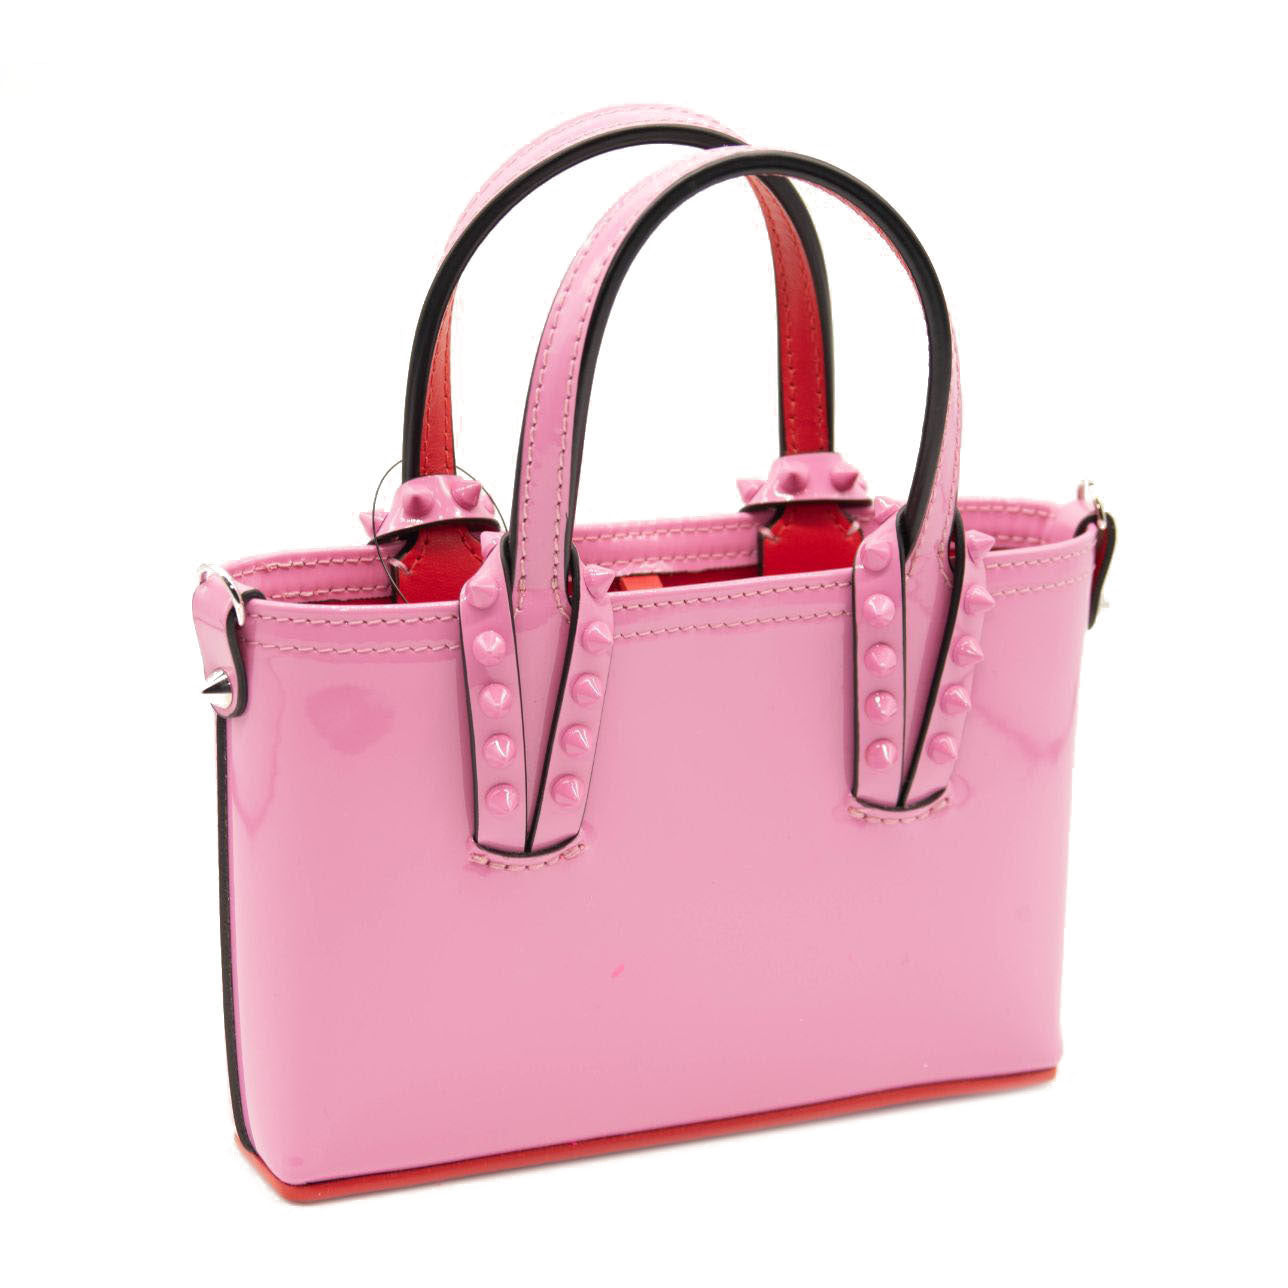 Christian Louboutin Cabata East West Tote Perforated Leather Mini Pink  1992221